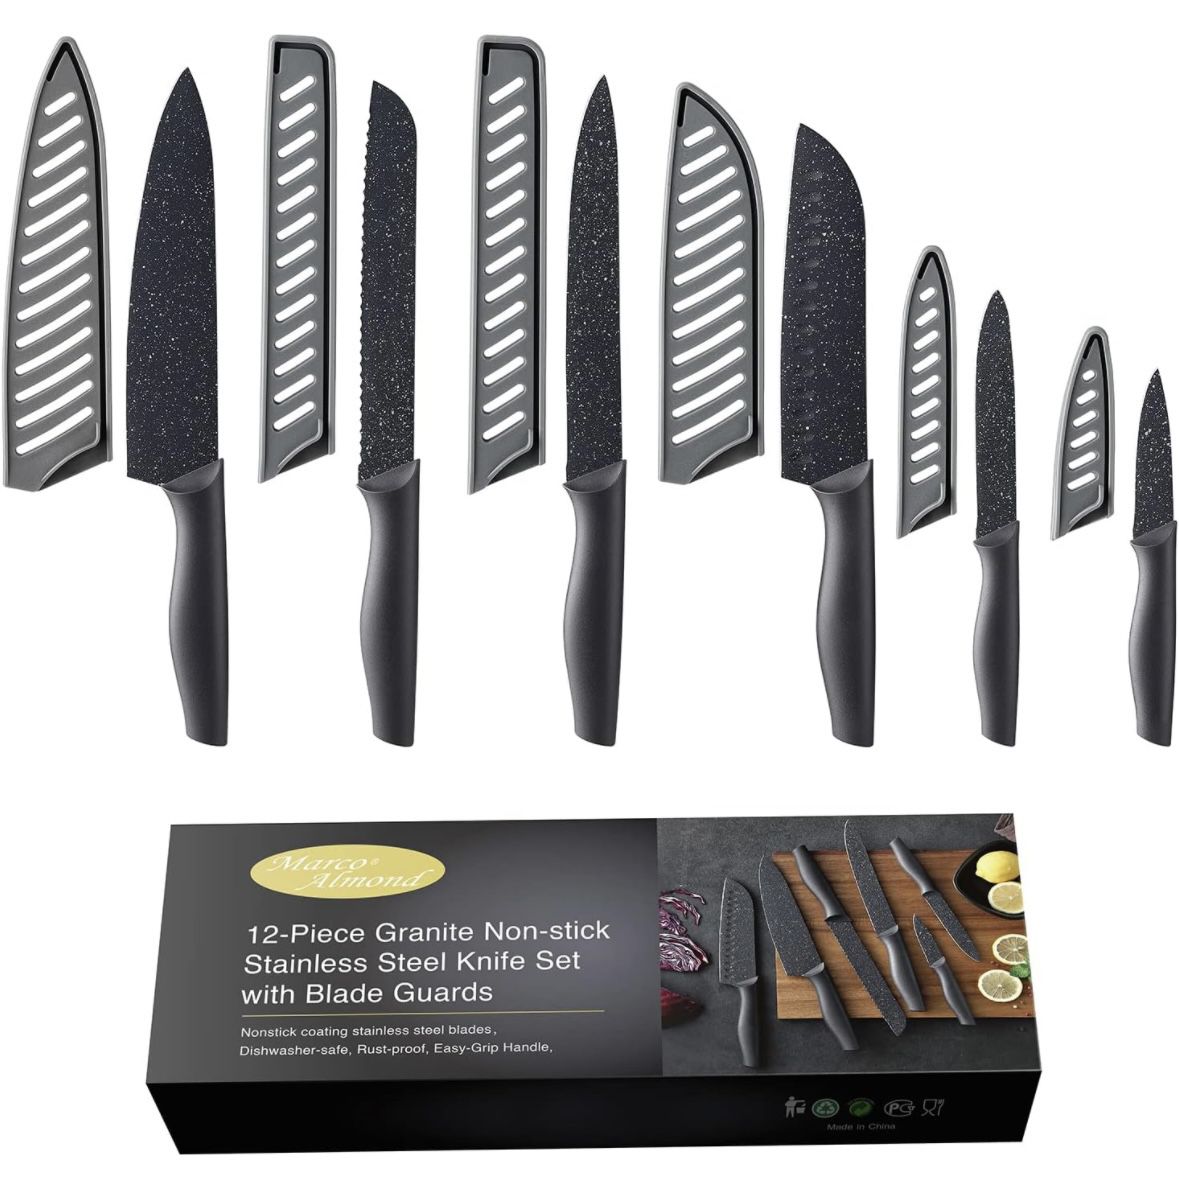 Marco Almond Kitchen Knife Set, KYA39 12-Piece Chef Knife Sets, 6 Knives with 6 Blade Guards, Stainless Steel Knives Set for Kitchen with Covers, Blac